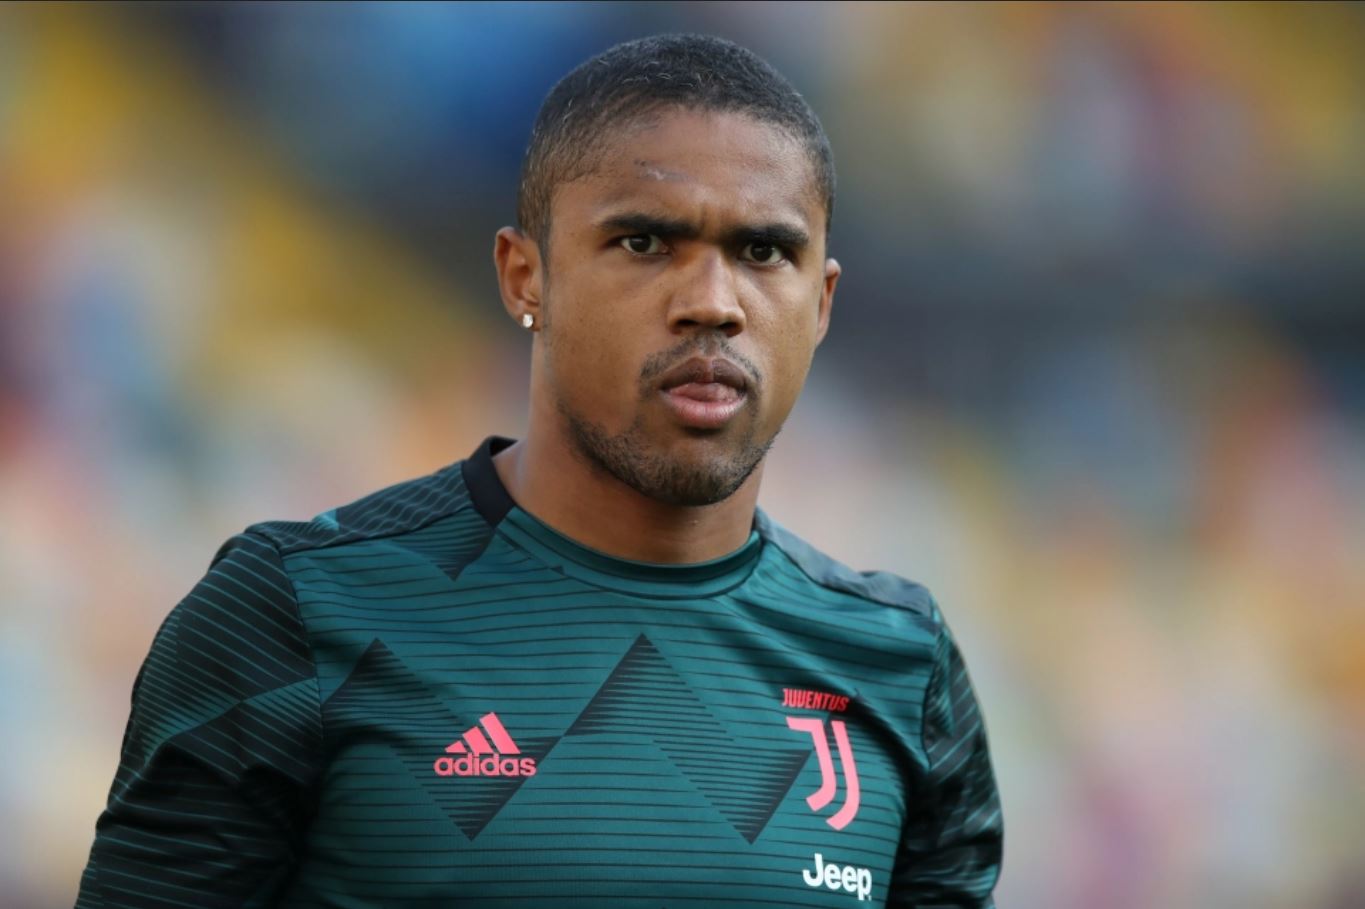 Juventus' Douglas Costa had been linked with a move to Man United but the Brazilian wants to fight for his place in Andrea Pirlo's side